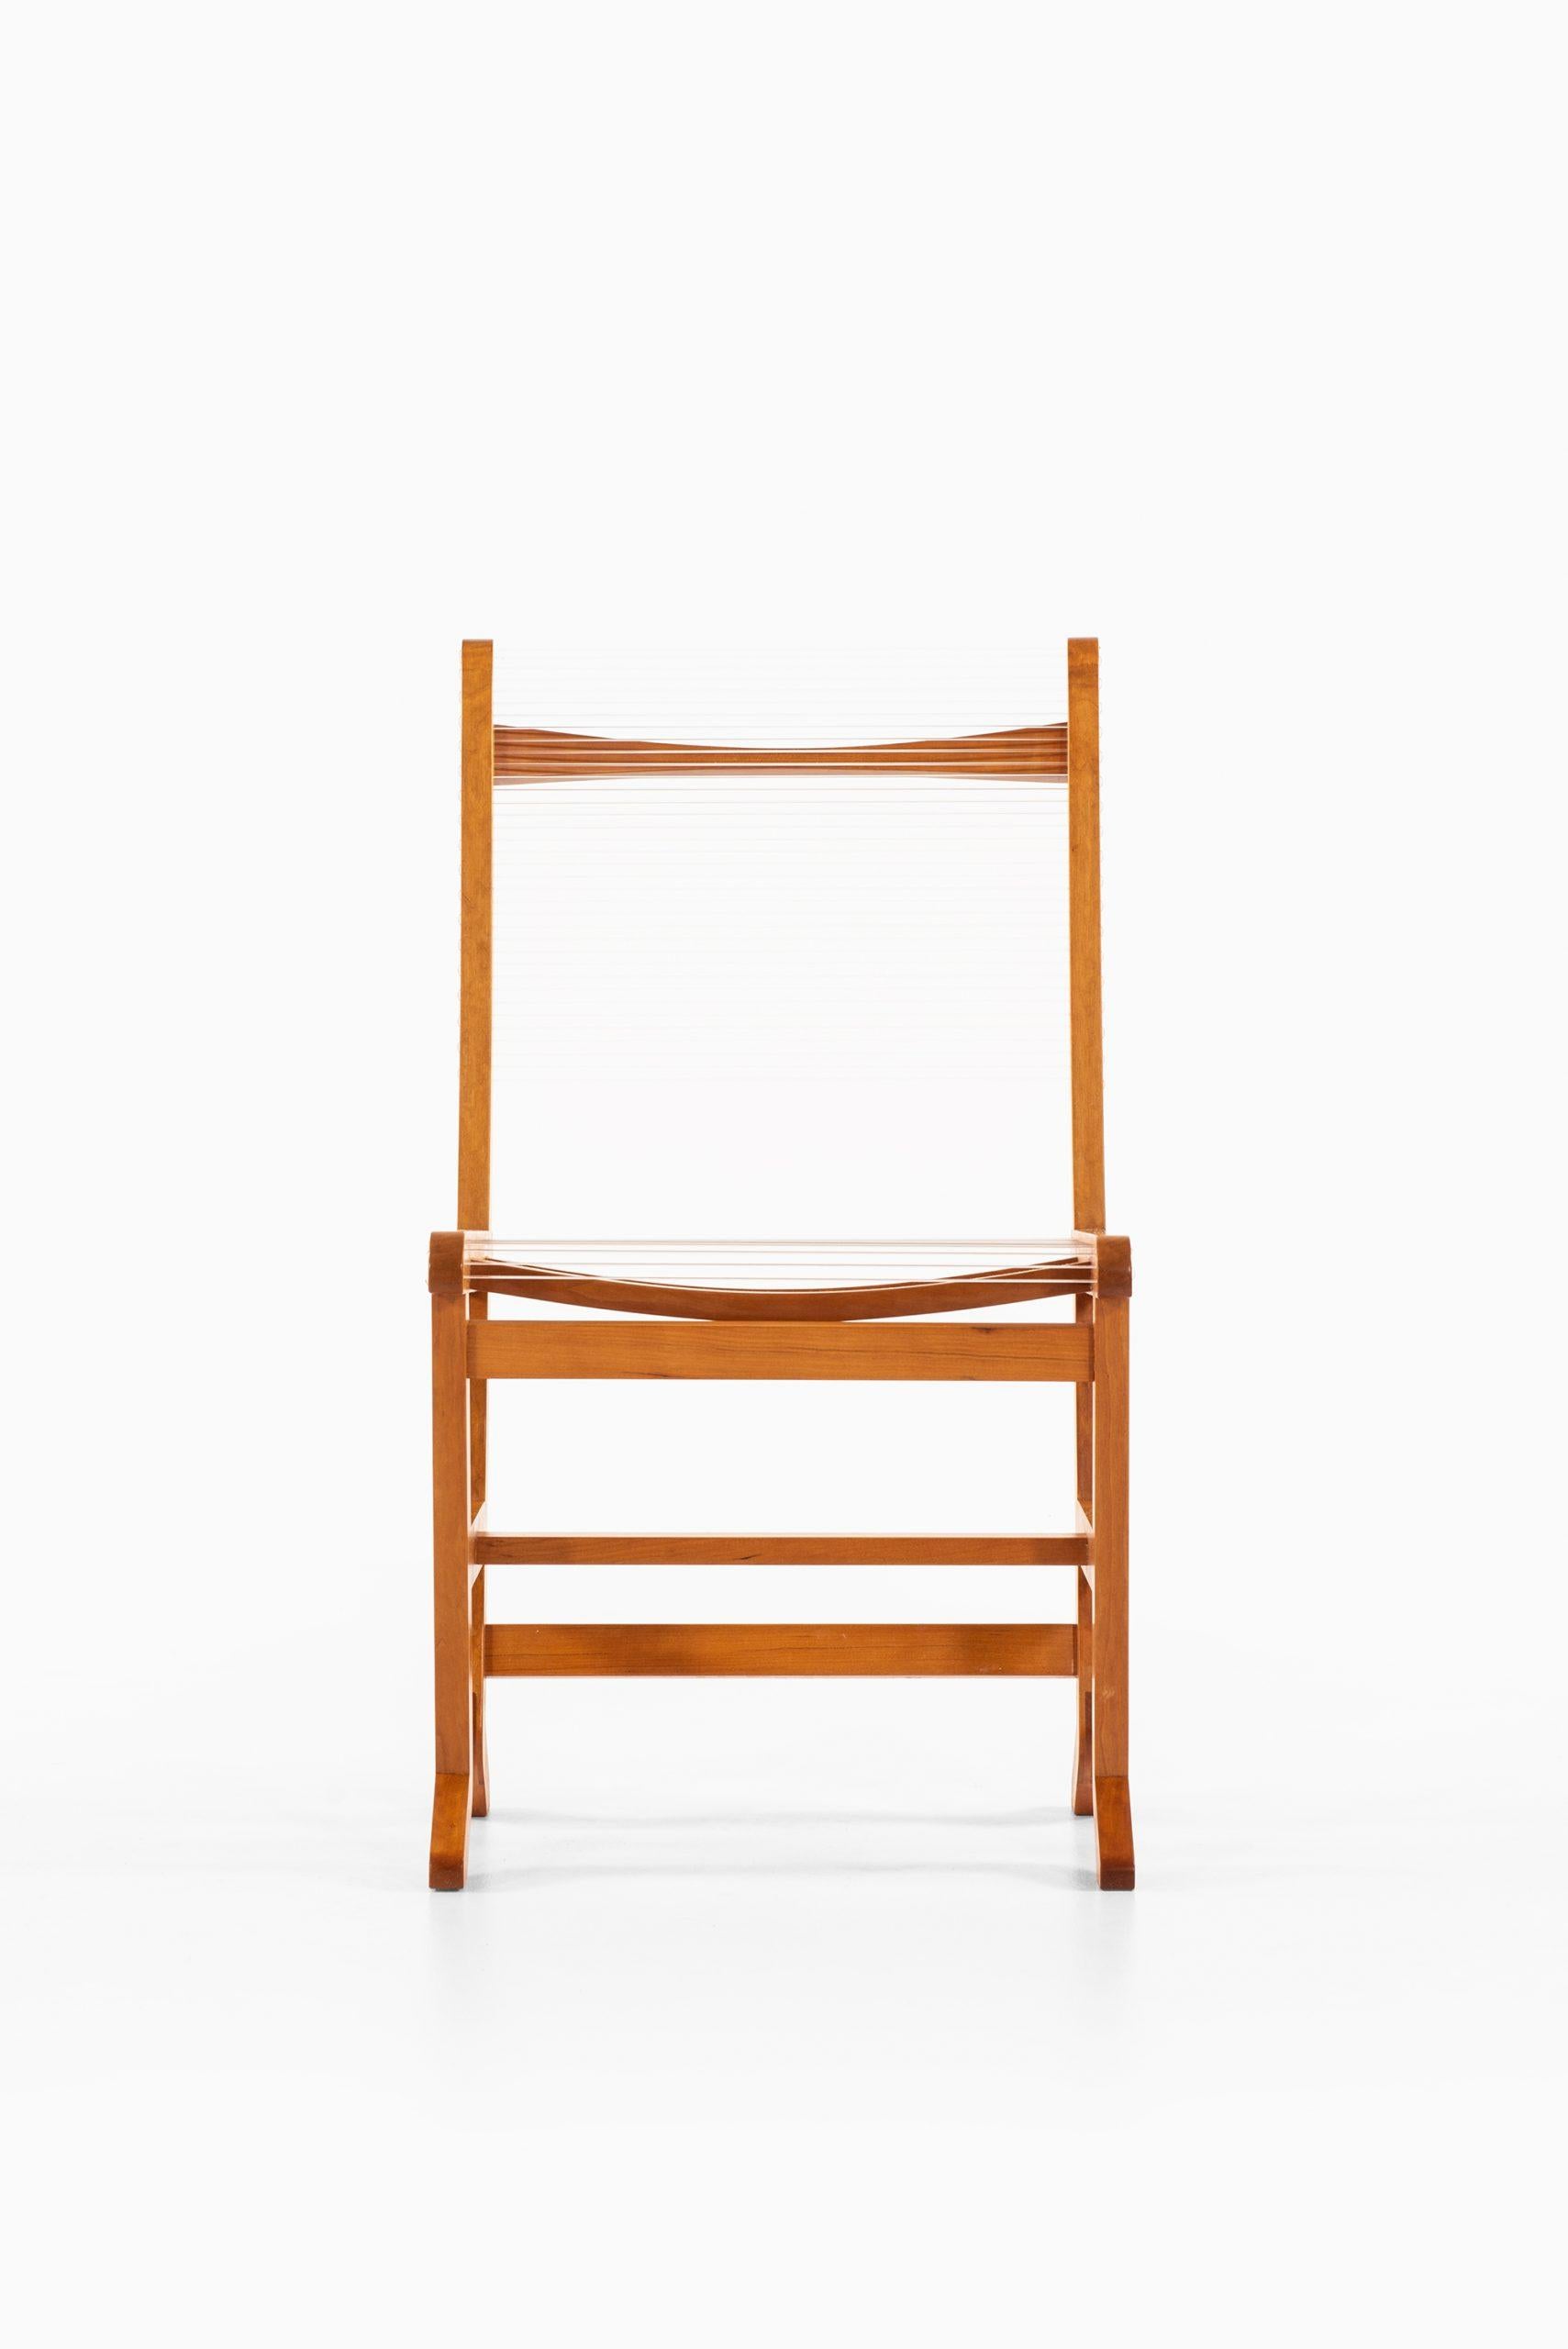 Mid-20th Century Chairs Attributed to Helge Vestergaard-Jensen by Cabinetmaker Thysen Nielsen For Sale